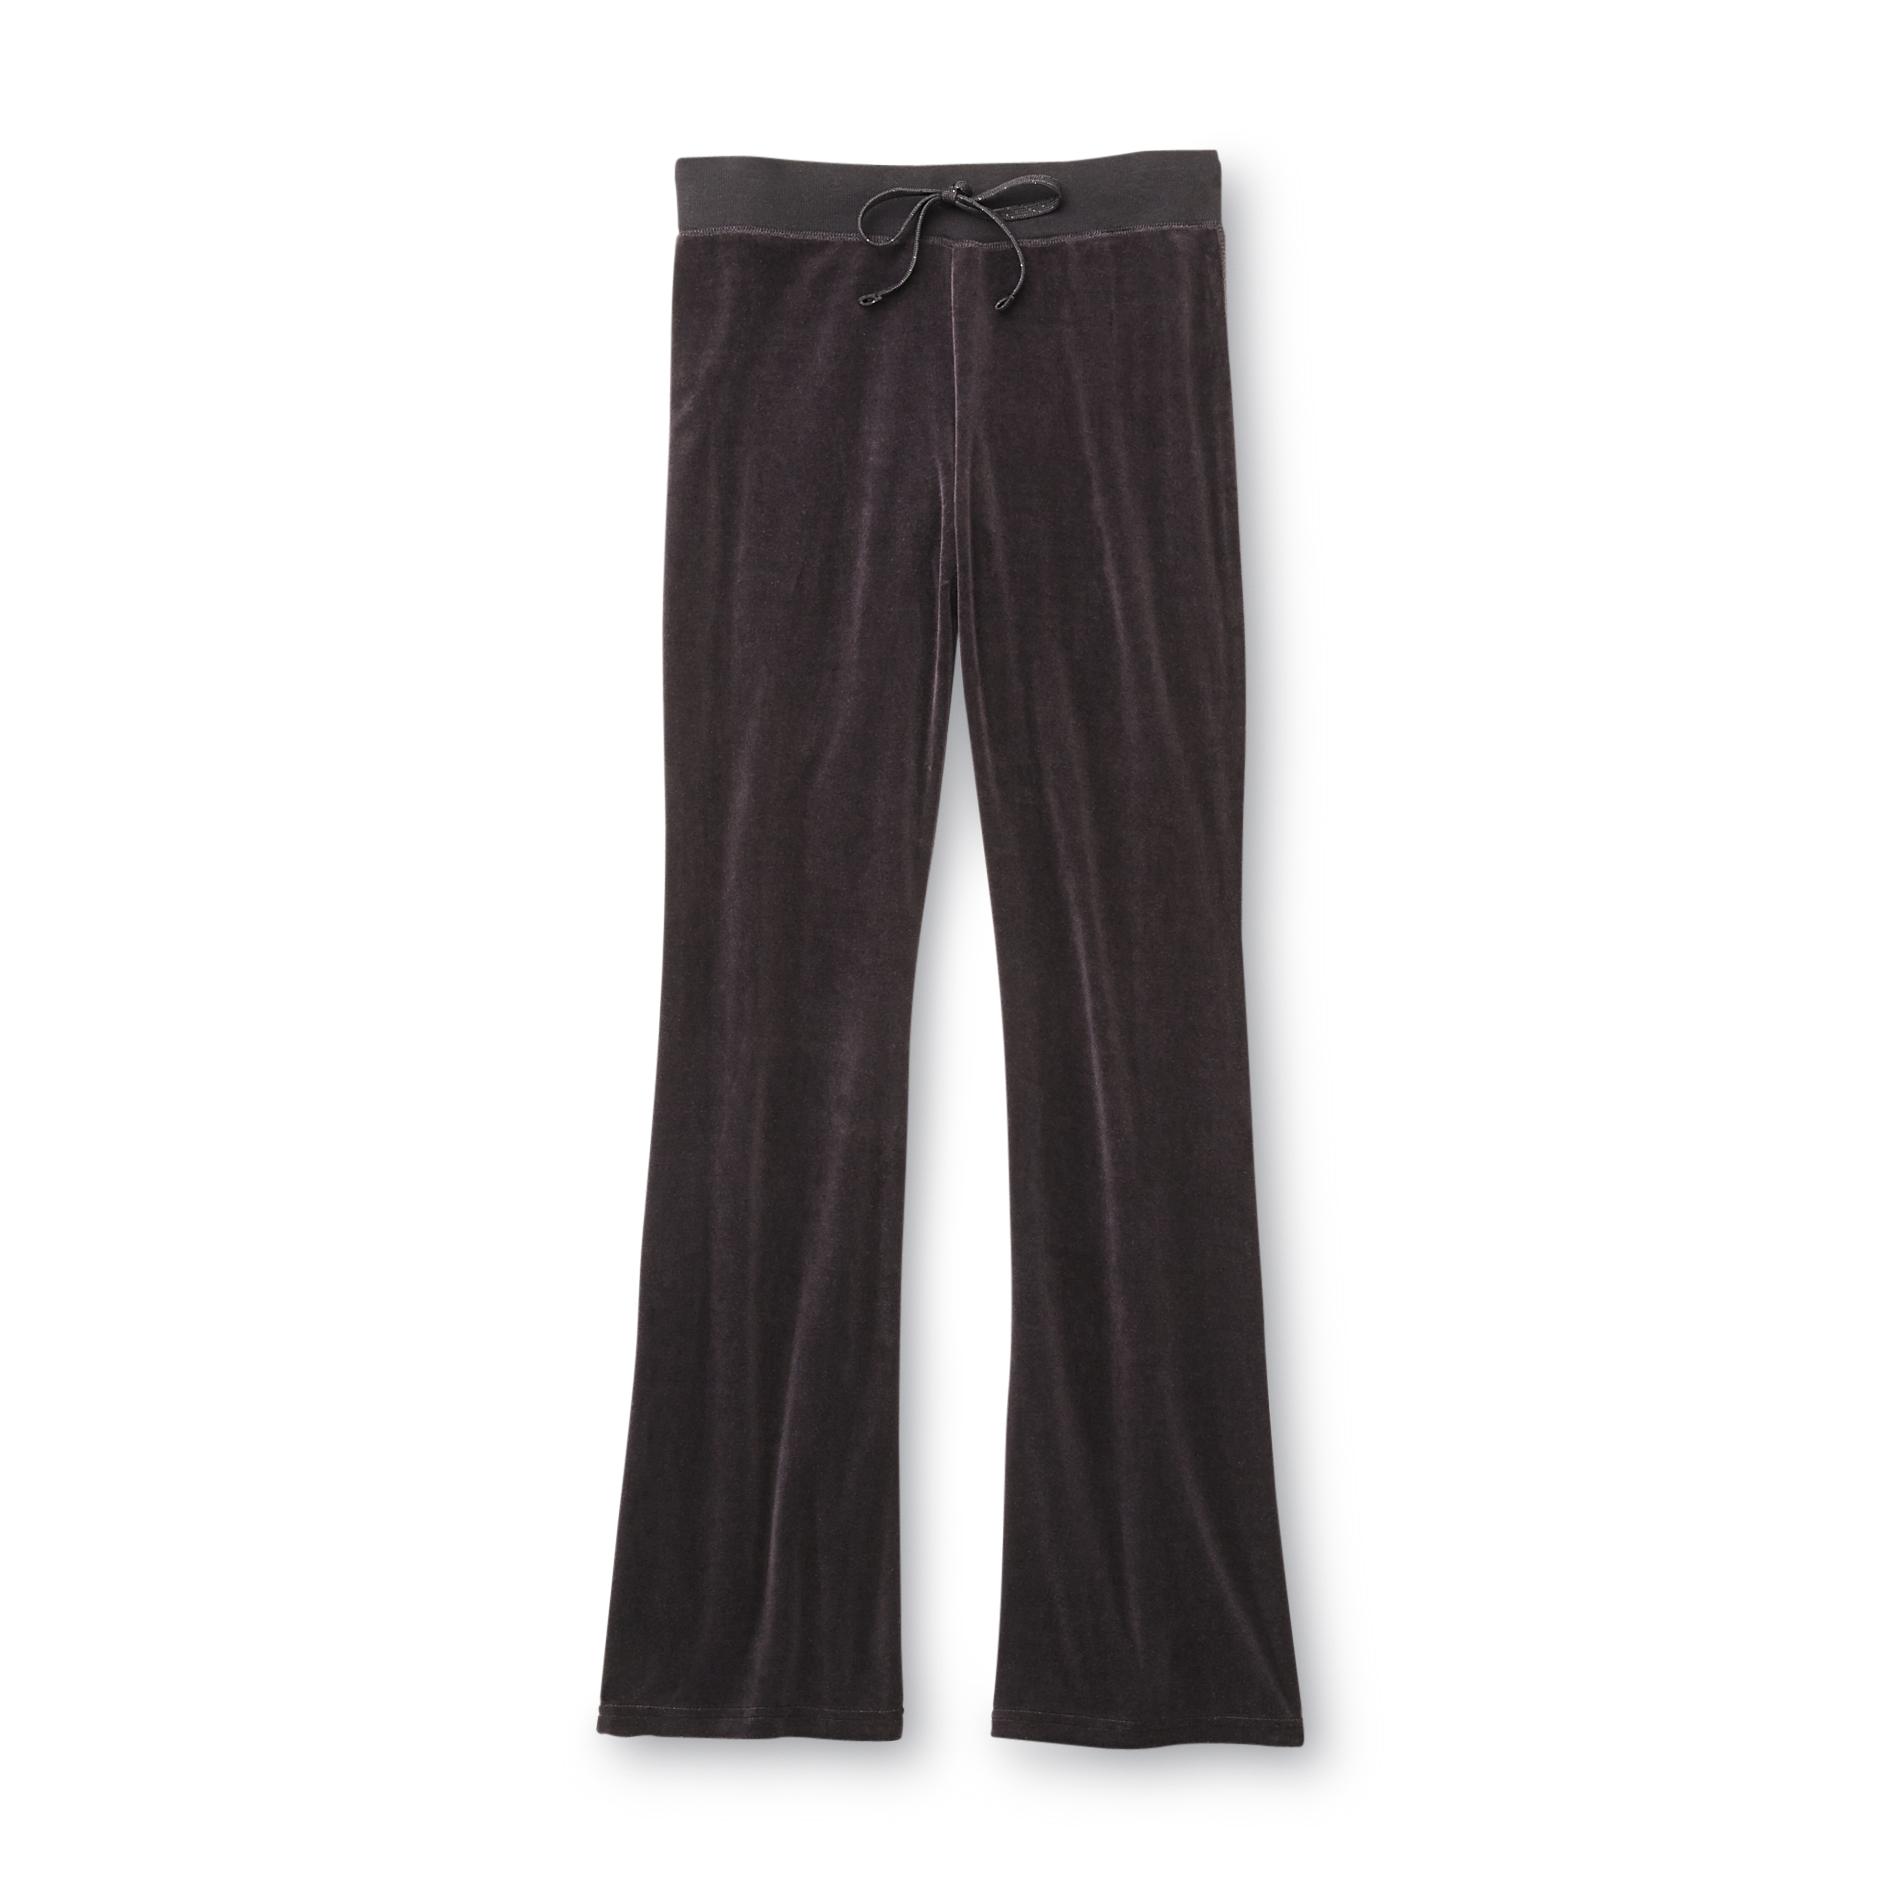 Route 66 Women's Bootcut Track Pants